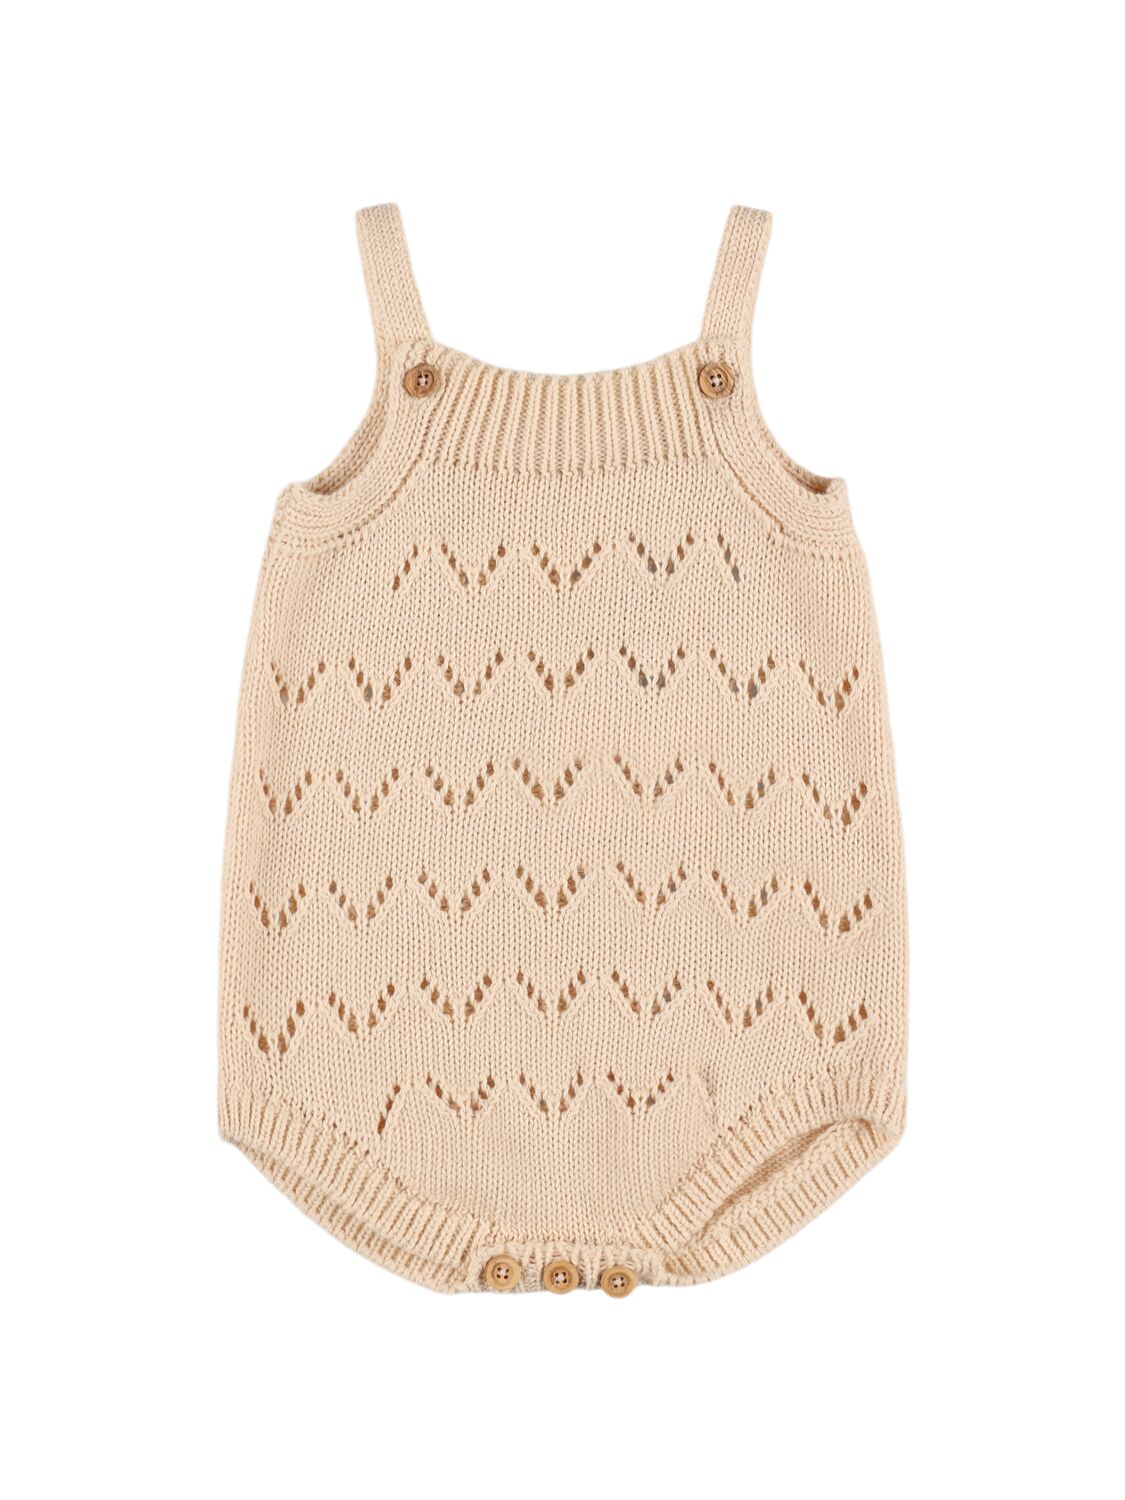 The New Society Babies' Organic Cotton Knit Bodysuit In Neutral